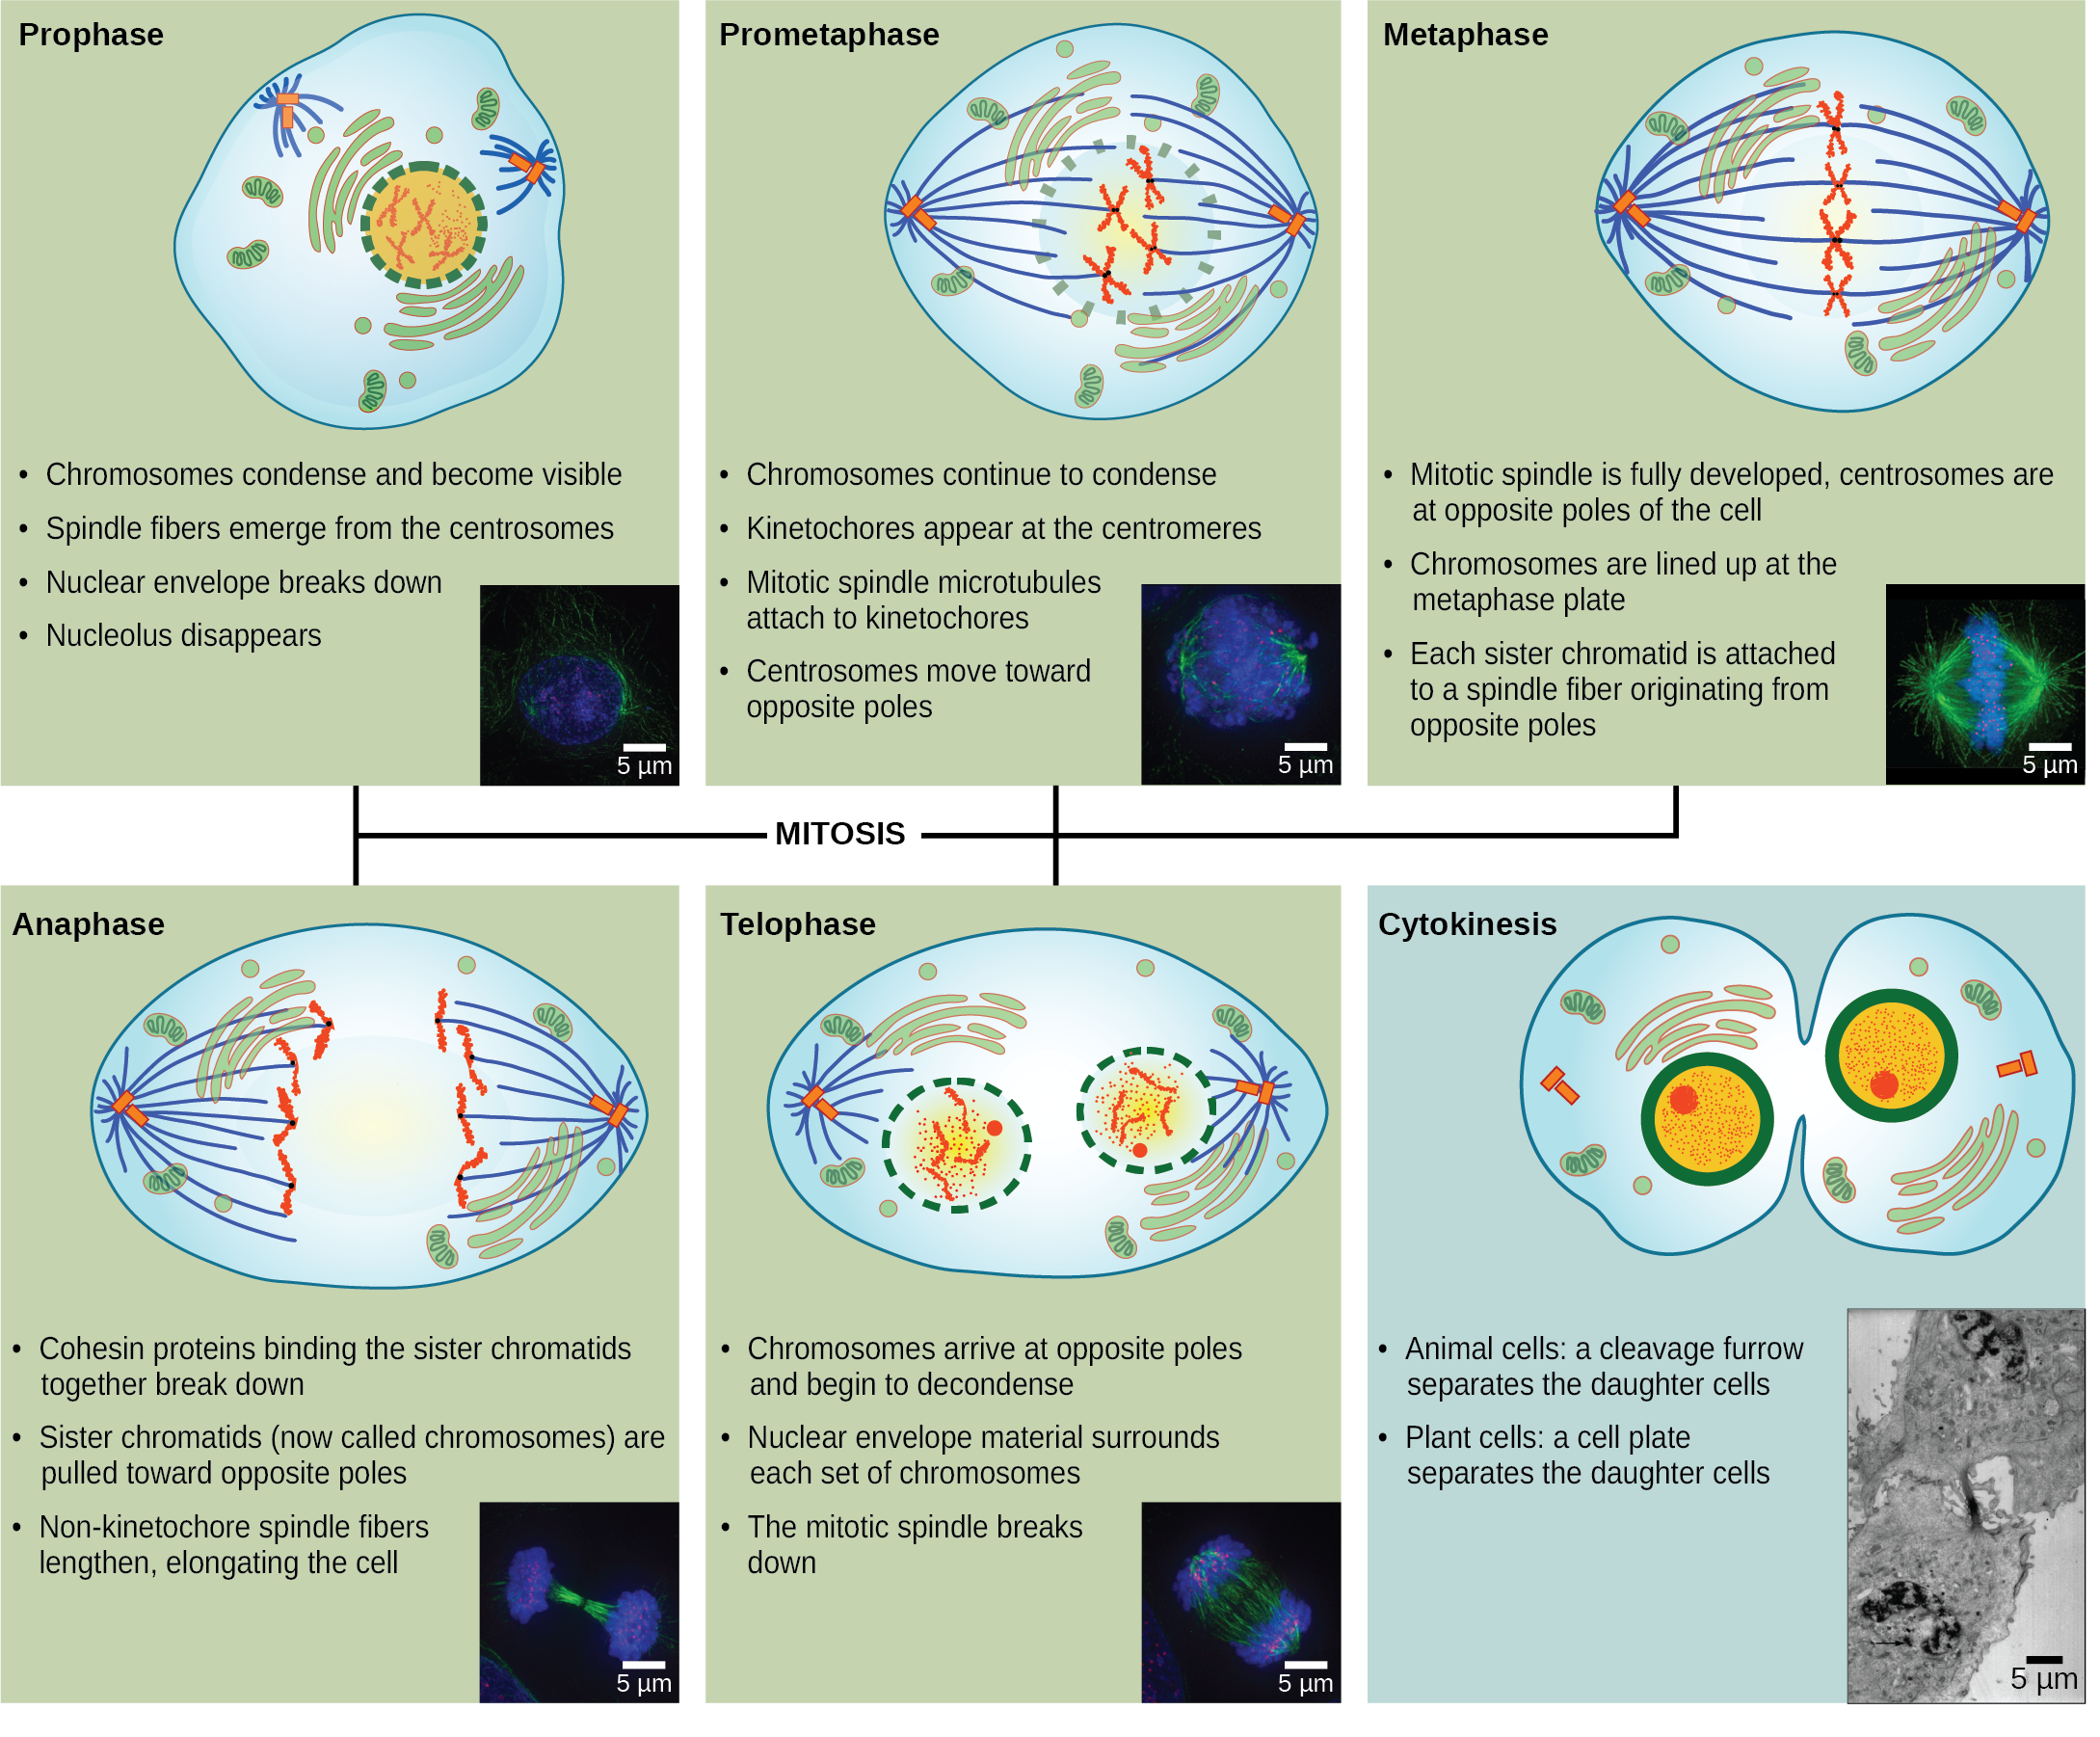 This diagram shows the five phases of mitosis and cytokinesis. During prophase, the chromosomes condense and become visible, spindle fibers emerge from the centrosomes, the nuclear envelope breaks down, and the nucleolus disappears. During prometaphase, the chromosomes continue to condense and kinetochores appear at the centromeres. Mitotic spindle microtubules attach to the kinetochores, and centrosomes move toward opposite poles. During metaphase, the mitotic spindle is fully developed, and centrosomes are at opposite poles of the cell. Chromosomes line up at the metaphase plate and each sister chromatid is attached to a spindle fiber originating from the opposite pole. During anaphase, the cohesin proteins that were binding the sister chromatids together break down. The sister chromatids, which are now called chromosomes, move toward opposite poles of the cell. Non-kinetochore spindle fibers lengthen, elongating the cell. During telophase, chromosomes arrive at the opposite poles and begin to decondense. The nuclear envelope reforms. During cytokinesis in animals, a cleavage furrow separates the two daughter cells. In plants, a cell plate separates the two cells.